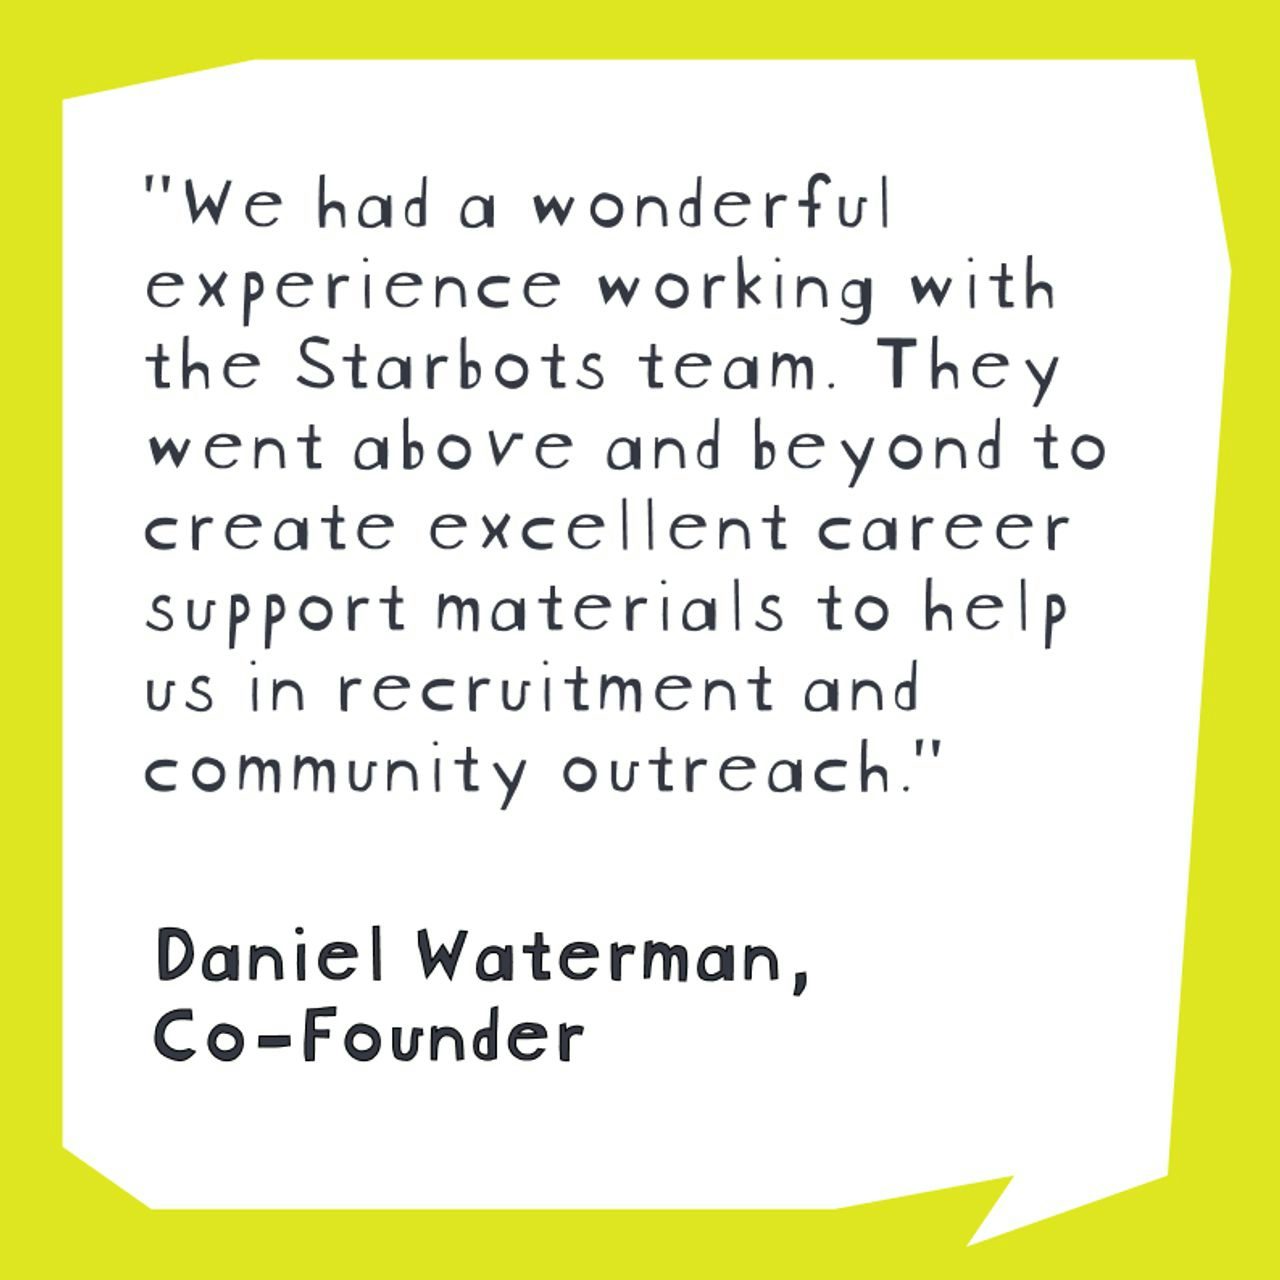 Testimonial by Daniel Waterman, Co-Founder, praising the Starbots team for their exceptional work on career support materials for recruitment and community outreach.